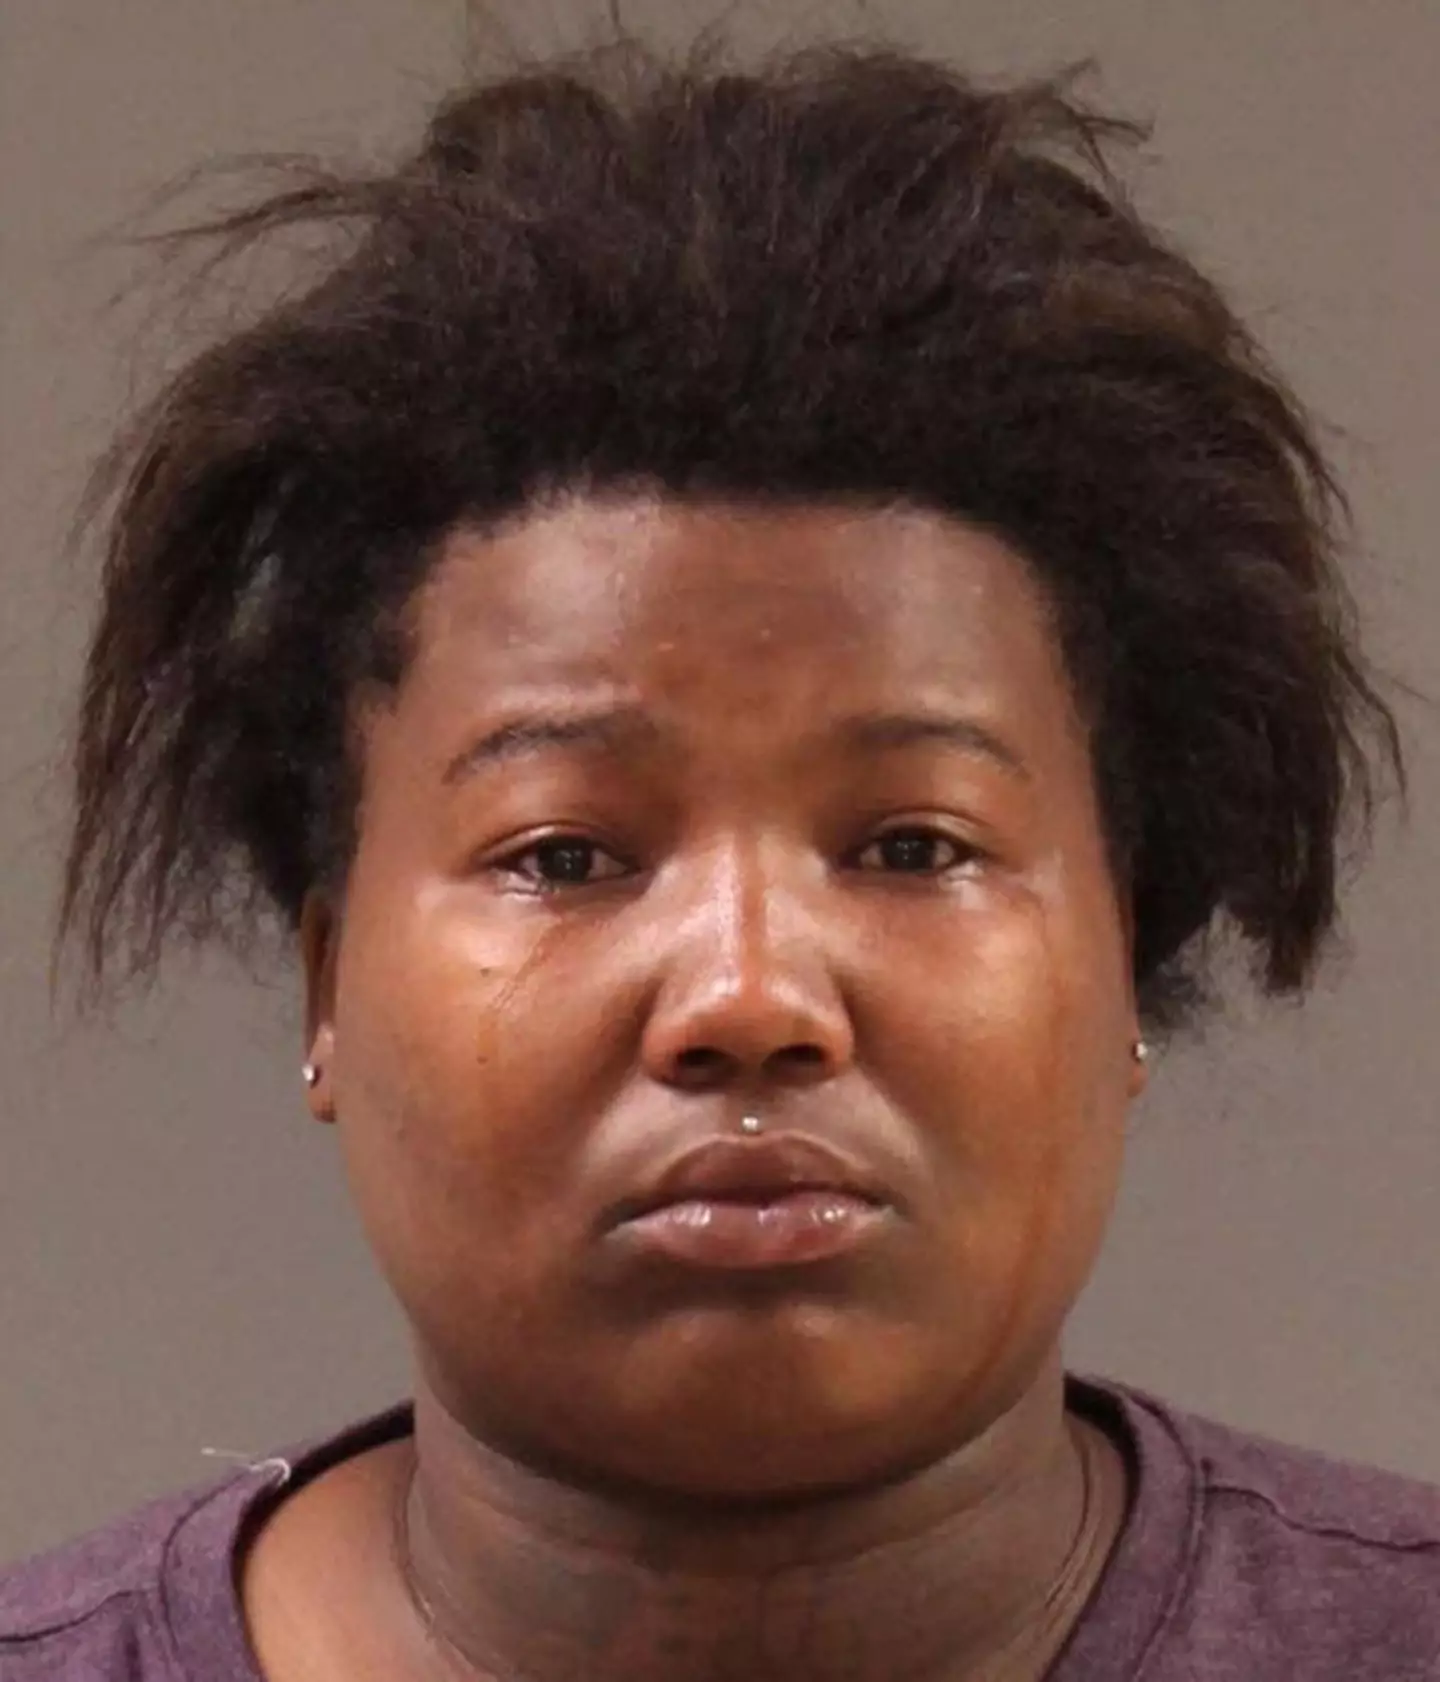 Dayjia Blackwell was charged after sharing a video from the looting.